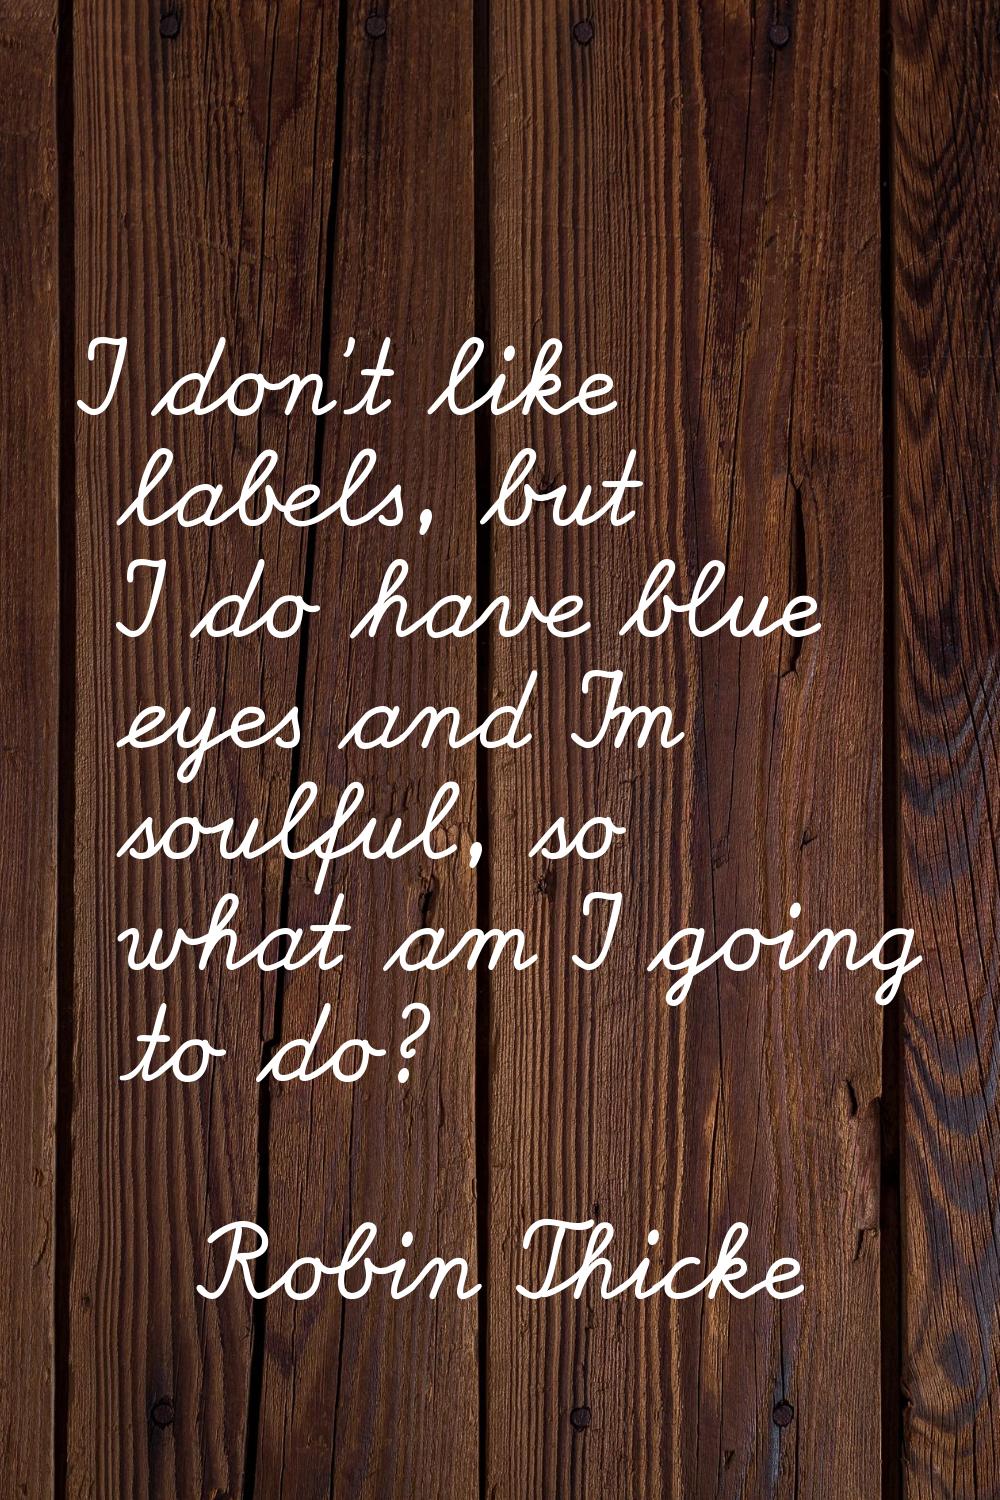 I don't like labels, but I do have blue eyes and I'm soulful, so what am I going to do?